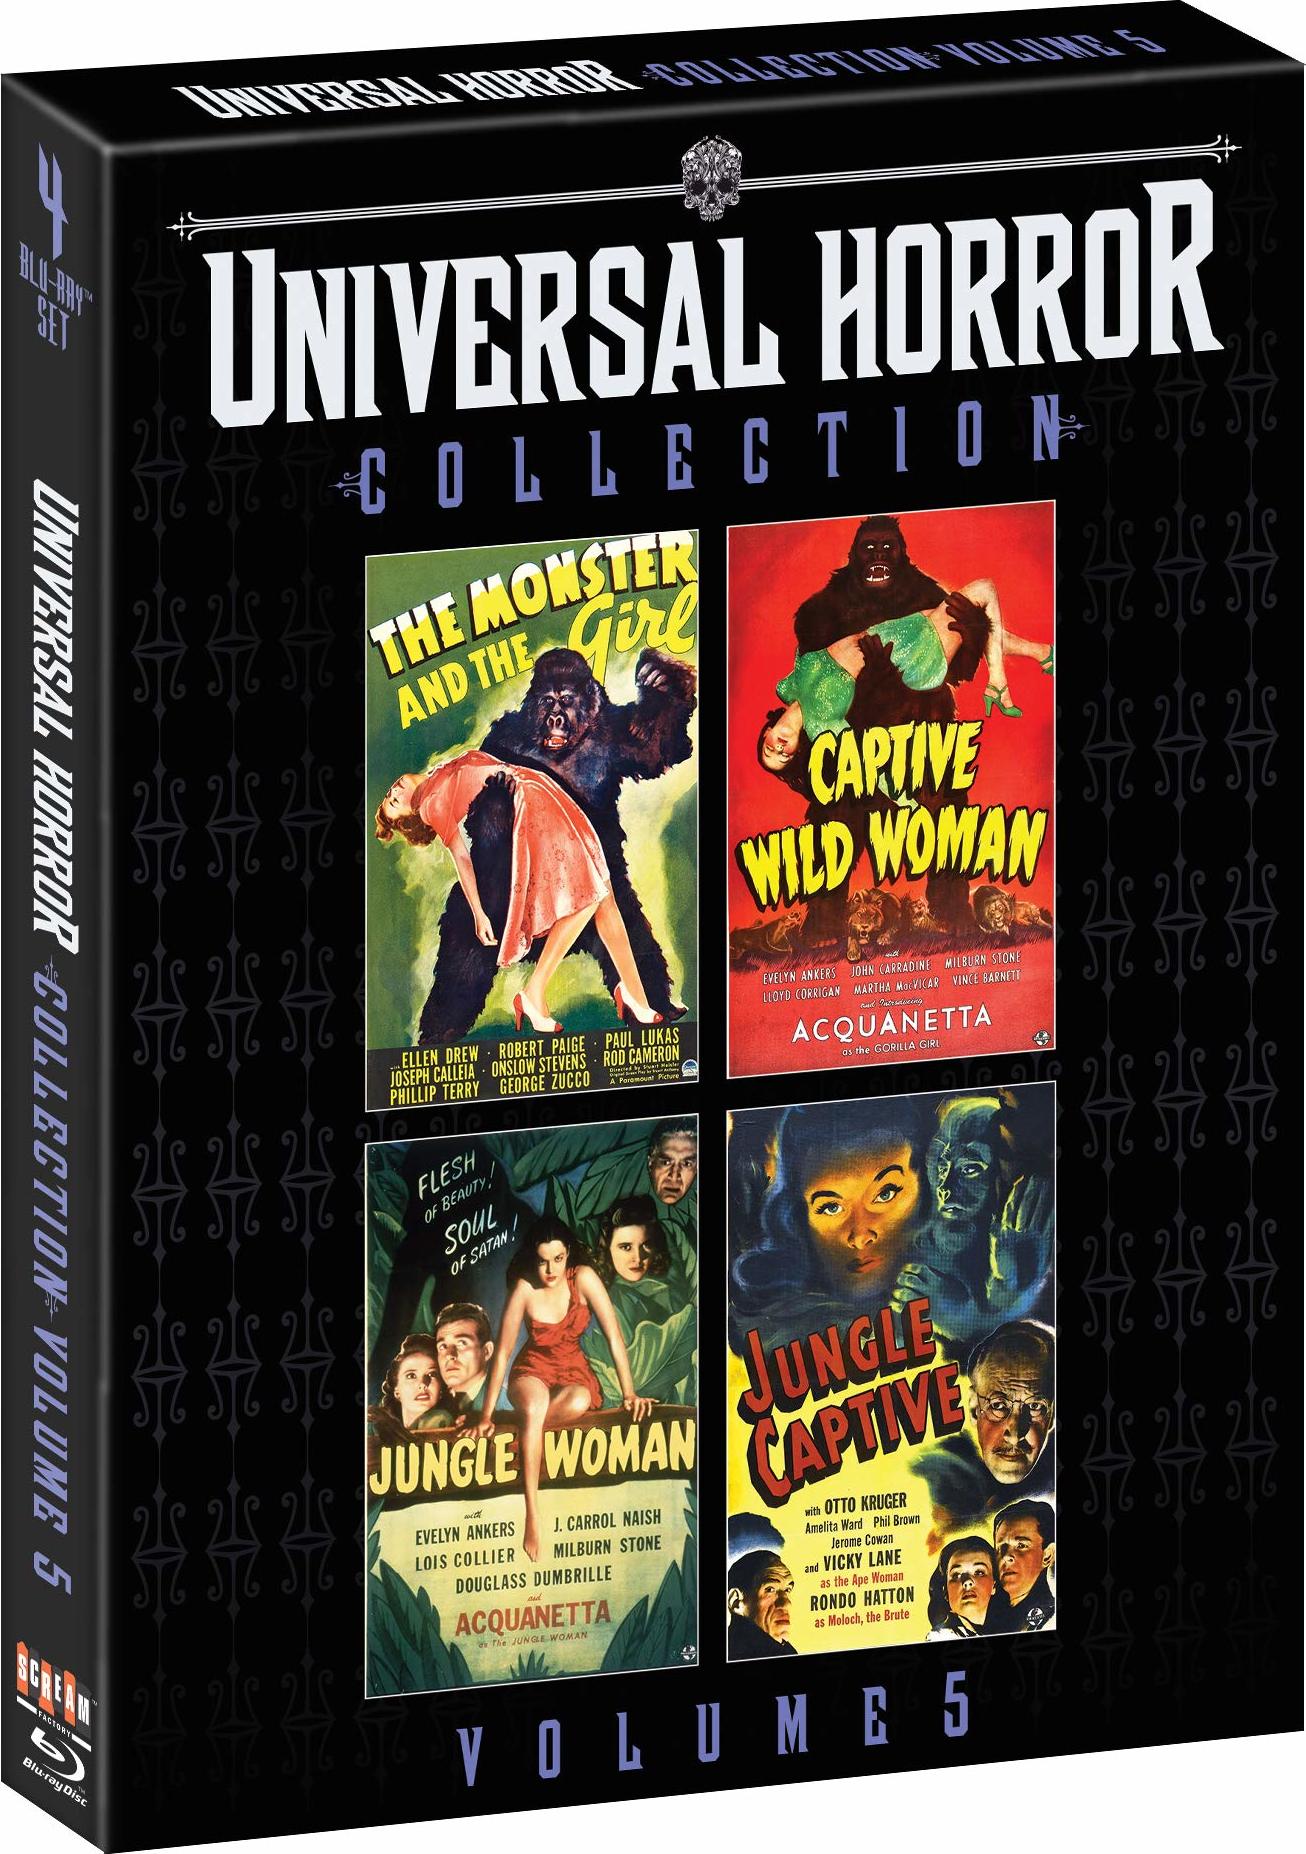 Universal Horror Collection Volume 5